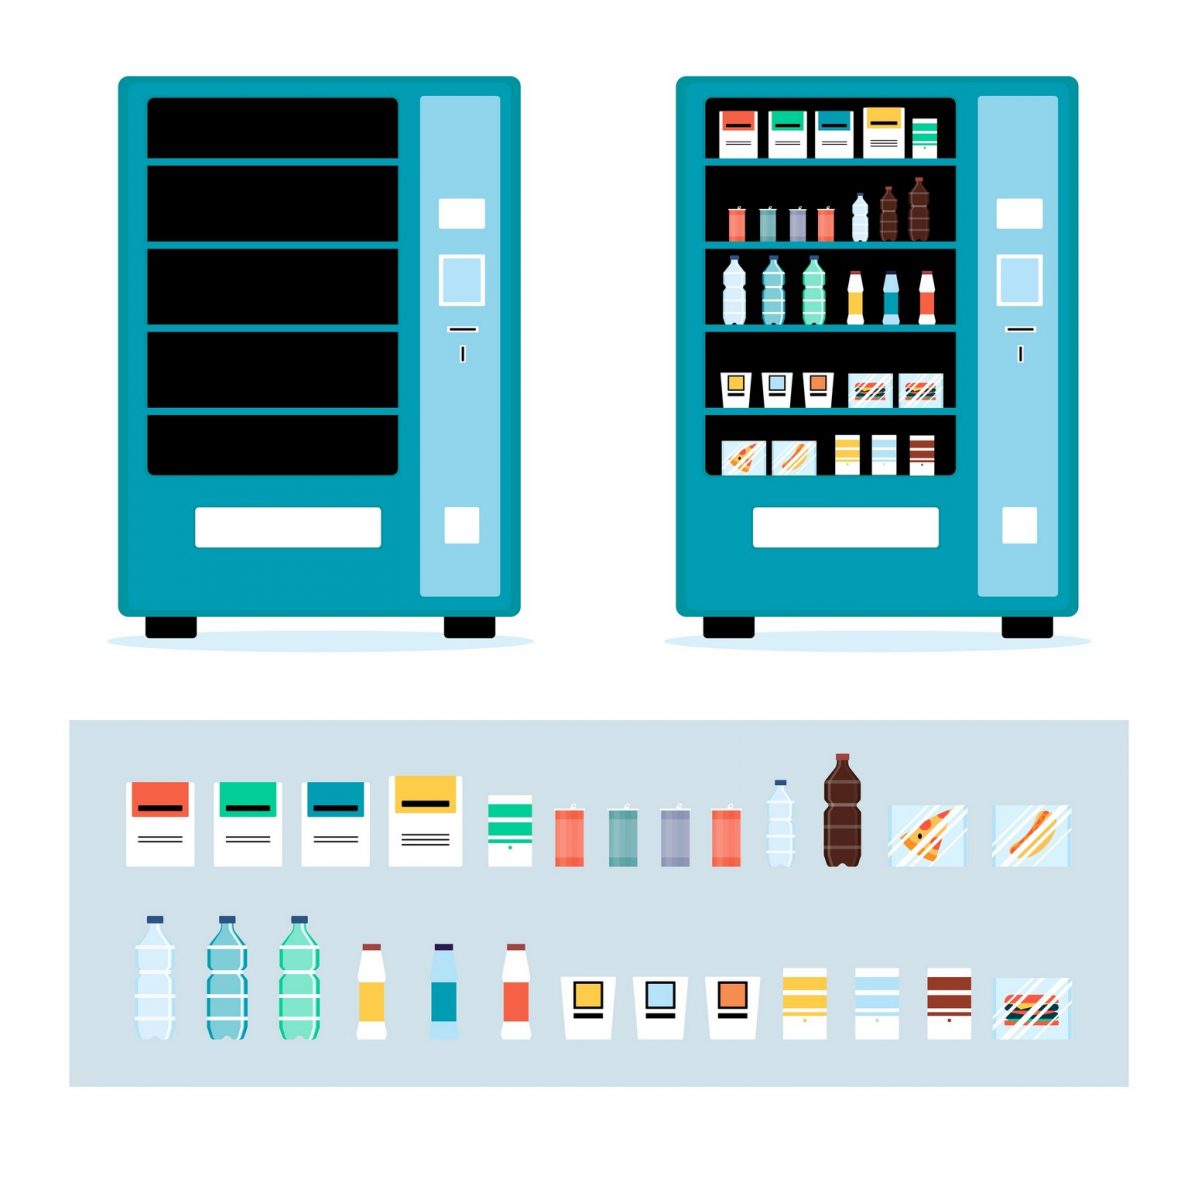 San Francisco Bay Area Vending | State-of-the-Art Technology | Refreshment Services